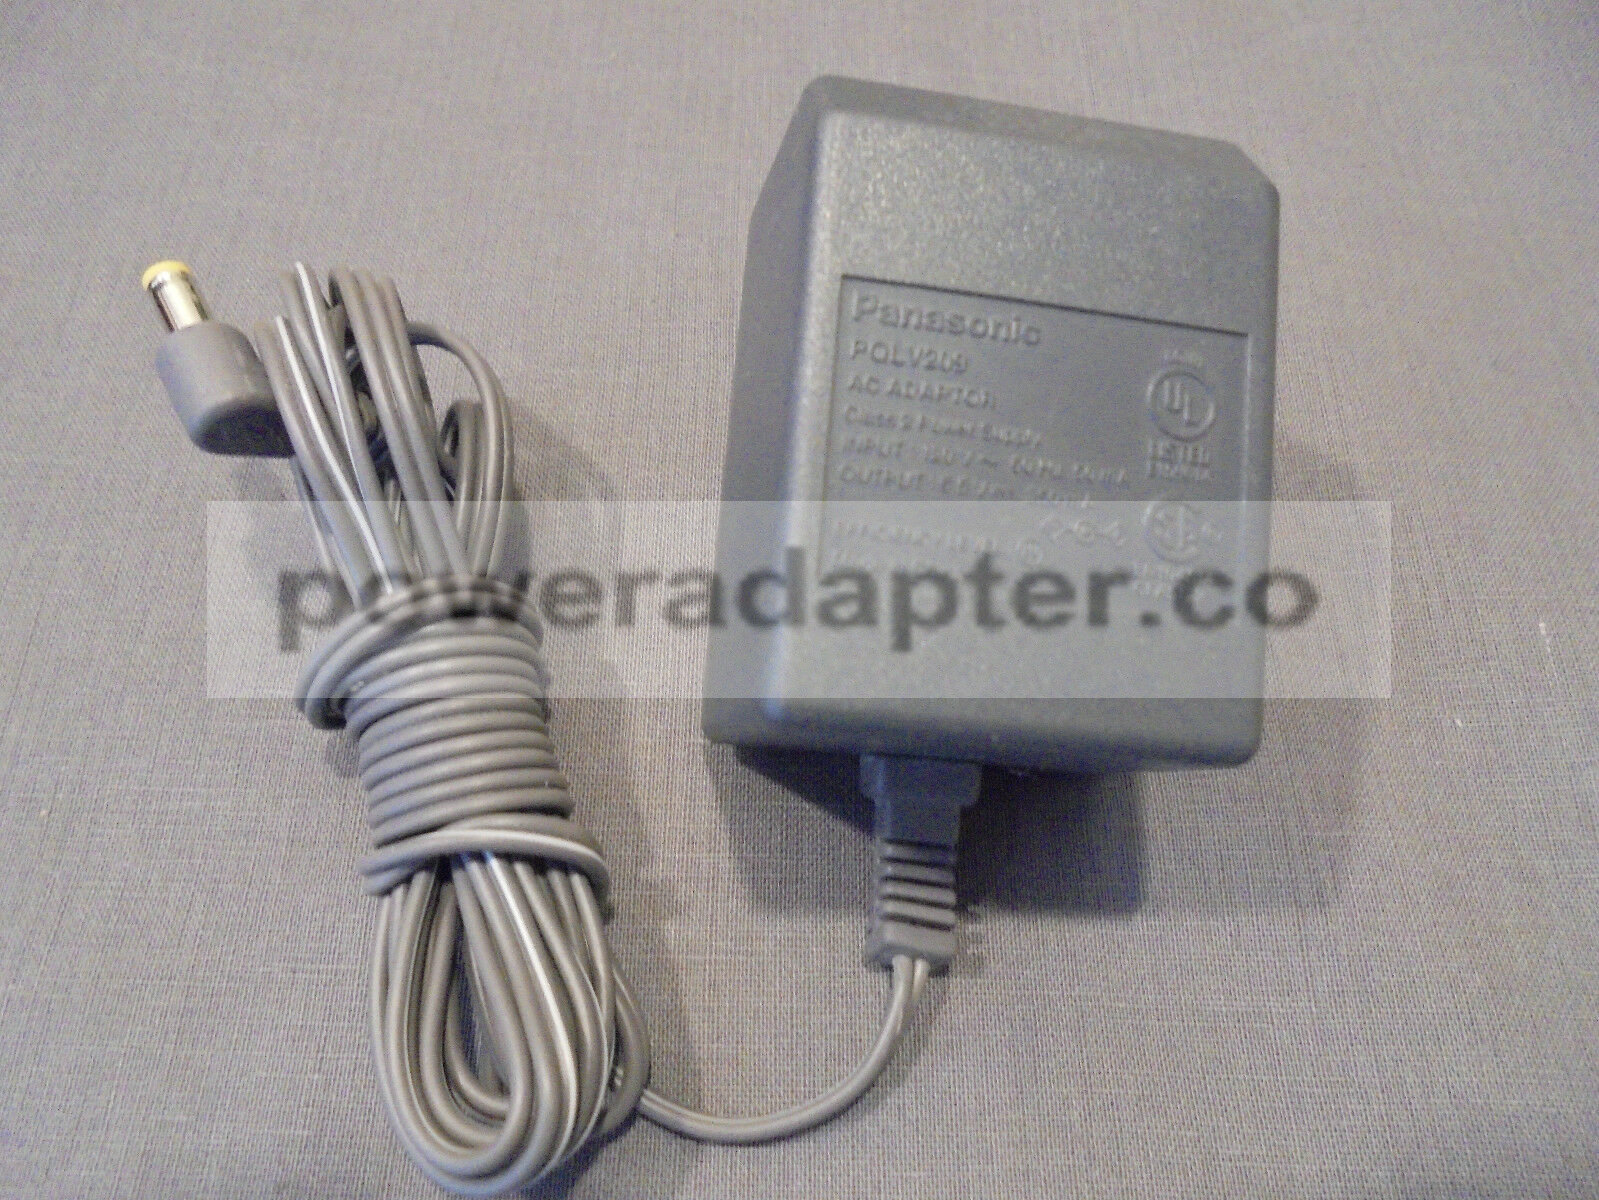 Panasonic PQLV209 AC Adapter 6.5V 350mA Genuine Condition: Used: An item that has been used previously. The item may